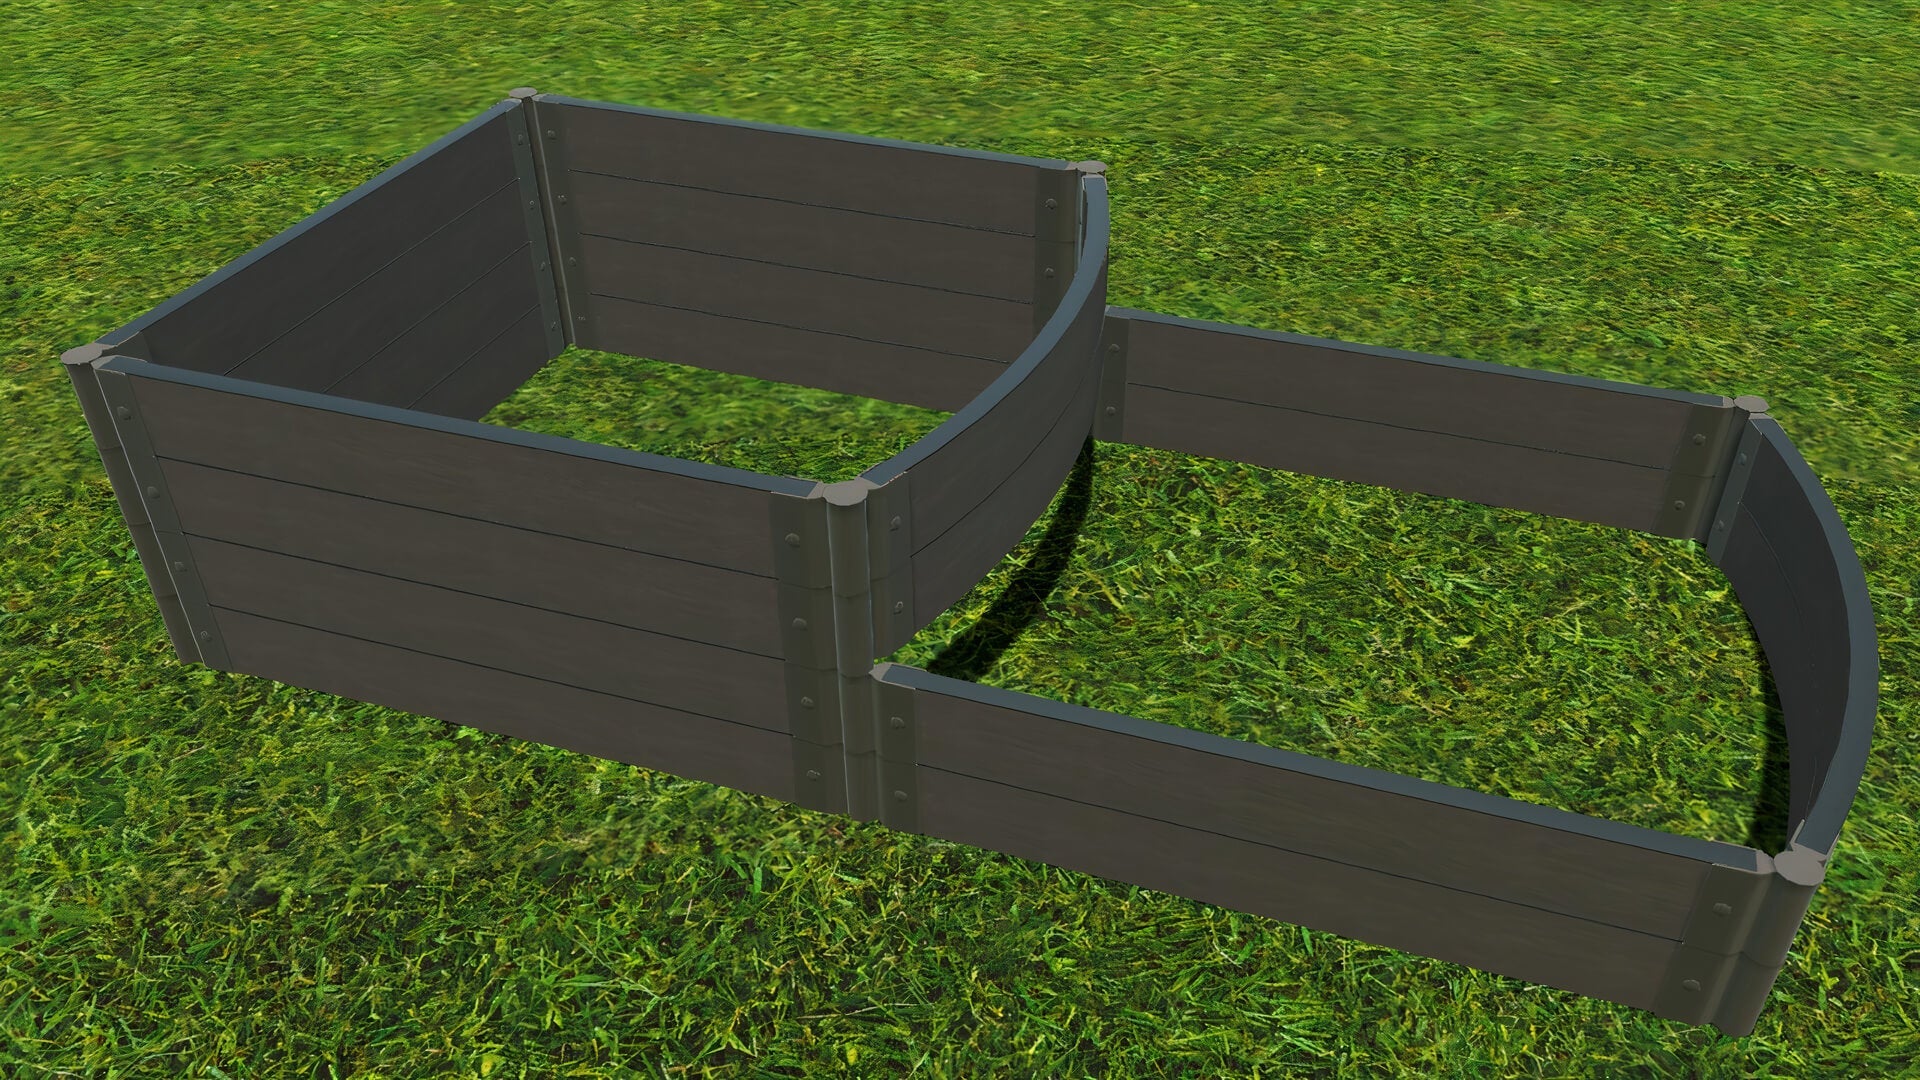 'Curved Terrace' - 4' x 8' x 22" Raised Garden Bed (Double Tier) Raised Garden Beds Frame It All Weathered Wood 2" 